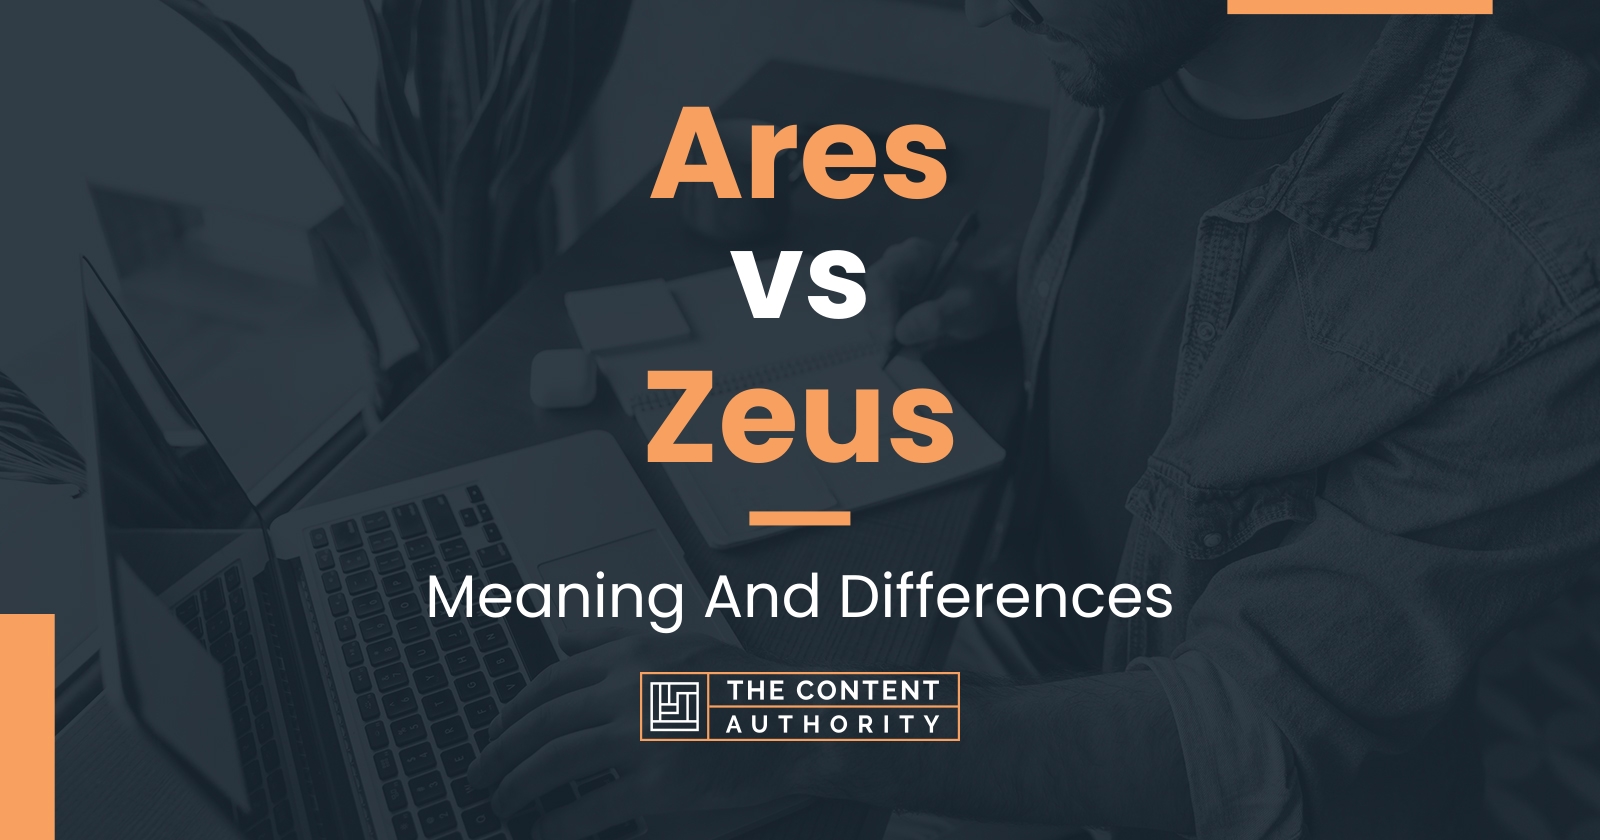 Ares vs Zeus: Meaning And Differences